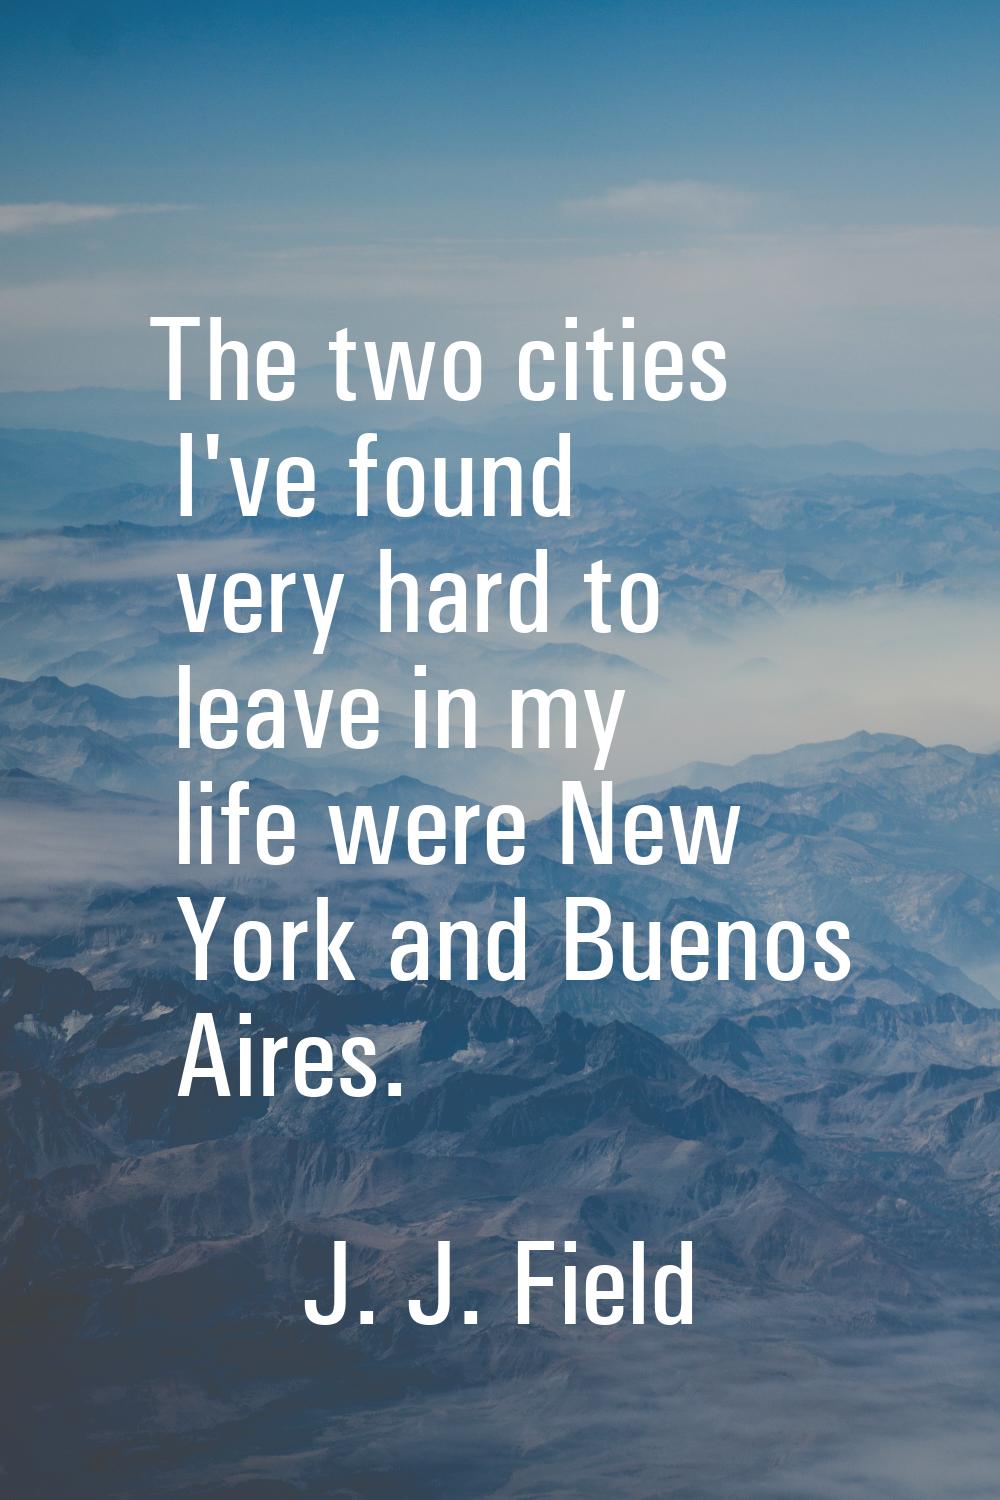 The two cities I've found very hard to leave in my life were New York and Buenos Aires.